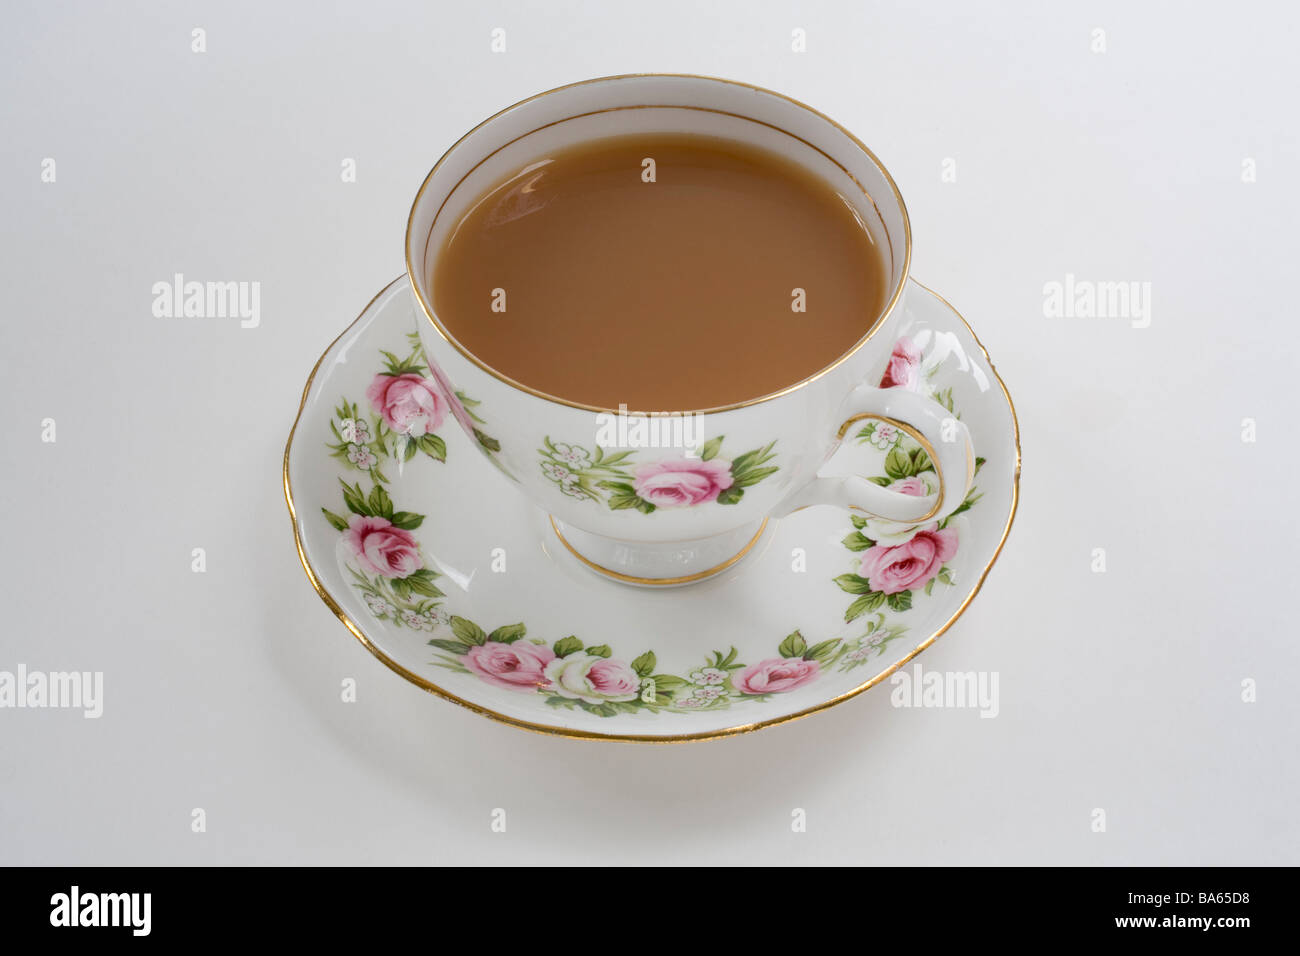 Cup of tea in a bone china cup with saucer Stock Photo